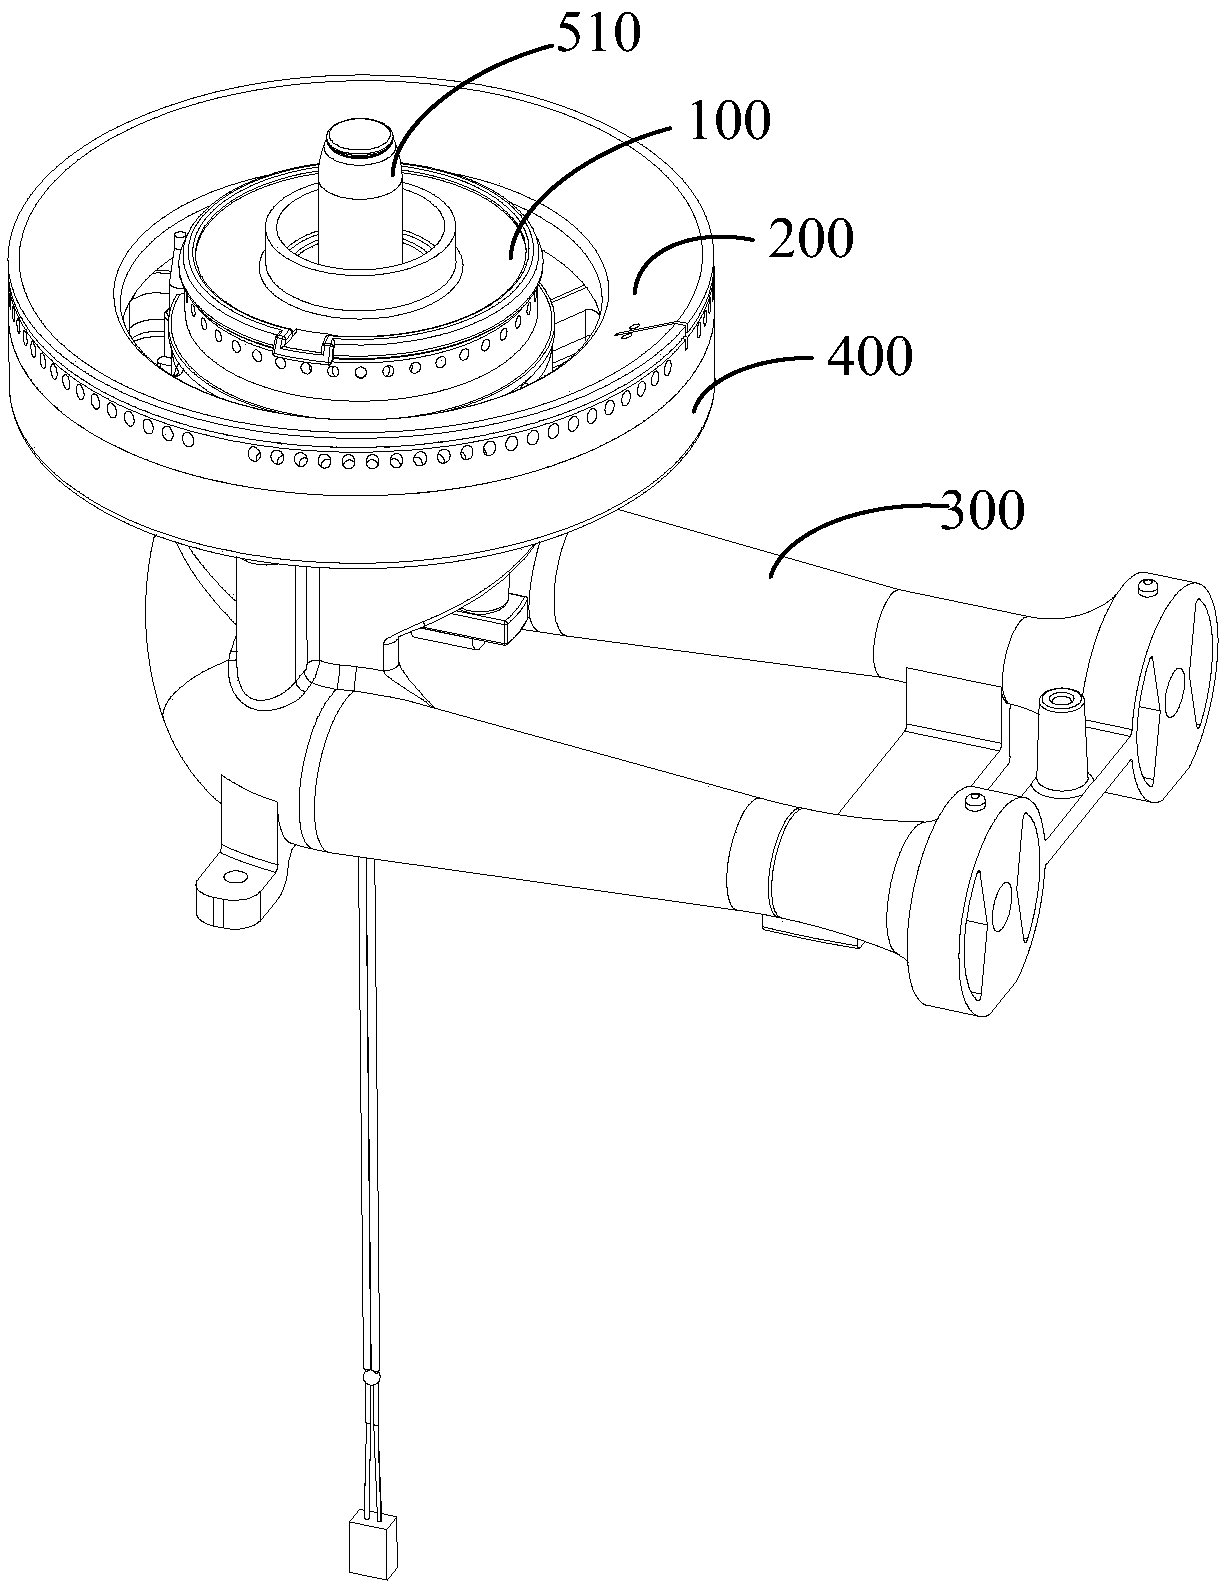 Furnace head assembly, combustor and gas stove